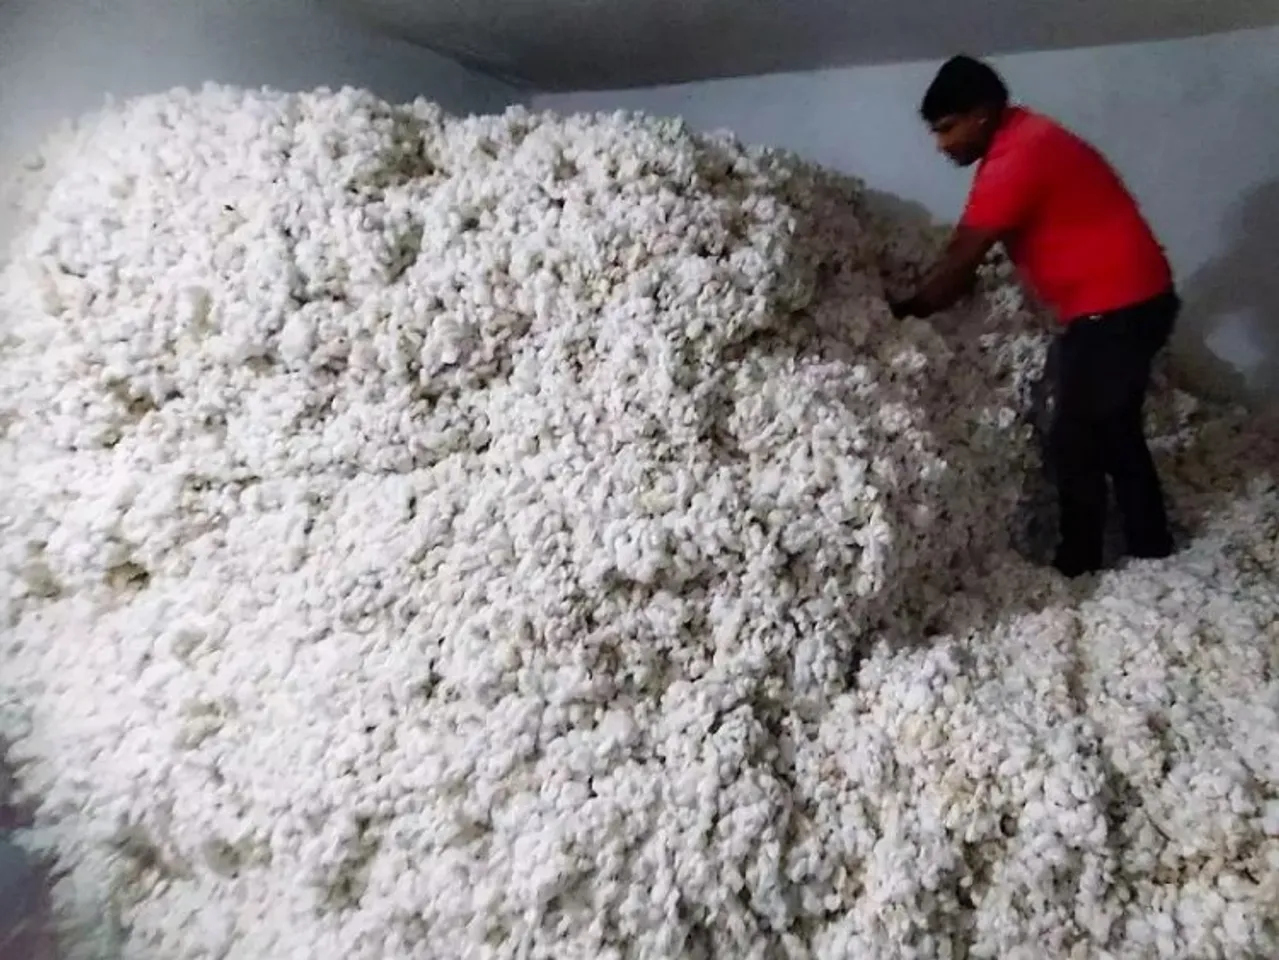 Finance Minister extends duty exemption on raw cotton imports till October 31